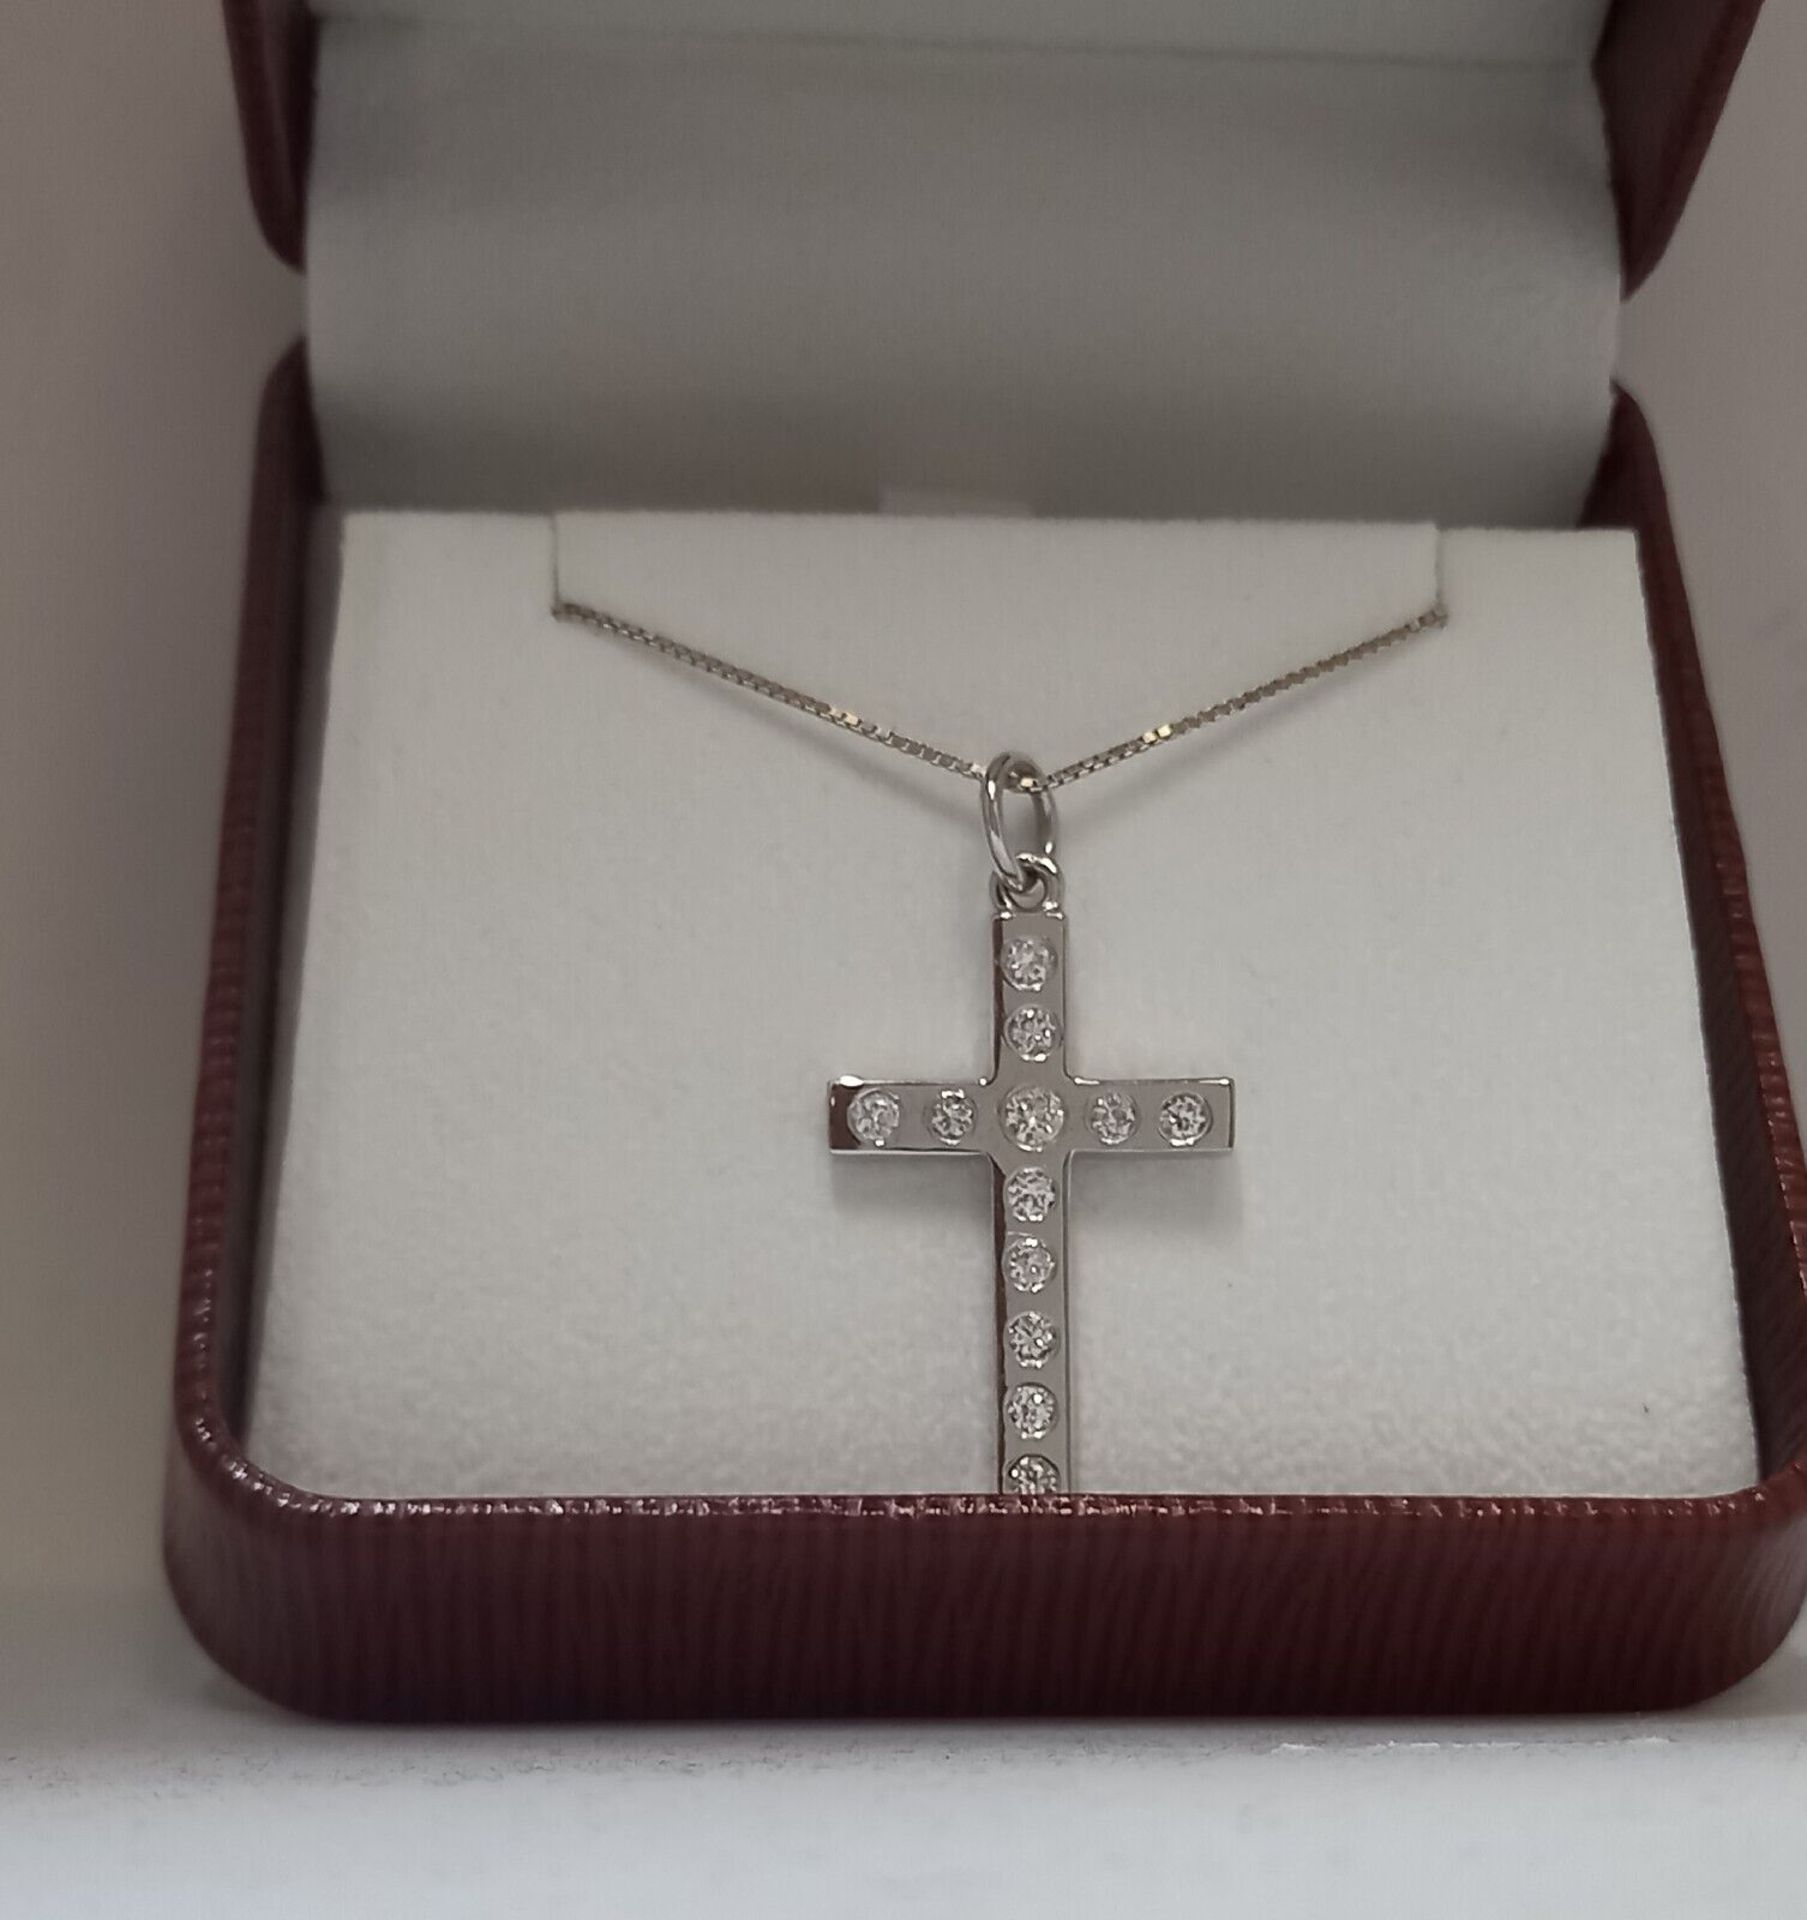 1.30CT HAND MADE DIAMOND CROSS 18CT WHITE GOLD/18CT WHITE GOLD CHAIN + GIFT BOX + VALUATION OF £3995 - Image 3 of 5